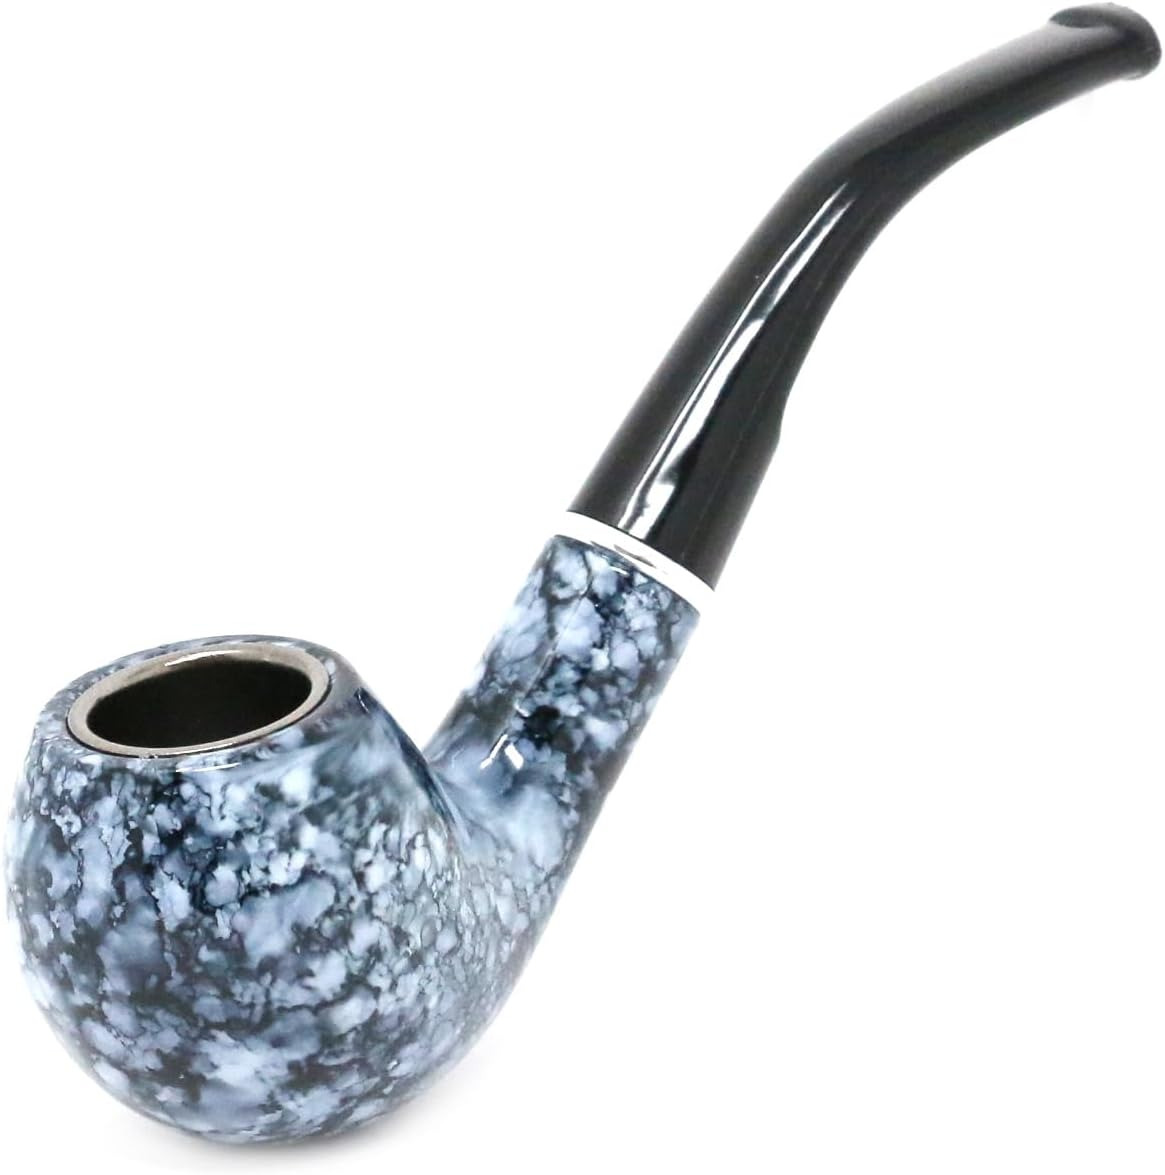 Marbleized Tobacco Durable Pipe, Perfect for Tobacco and for Props.